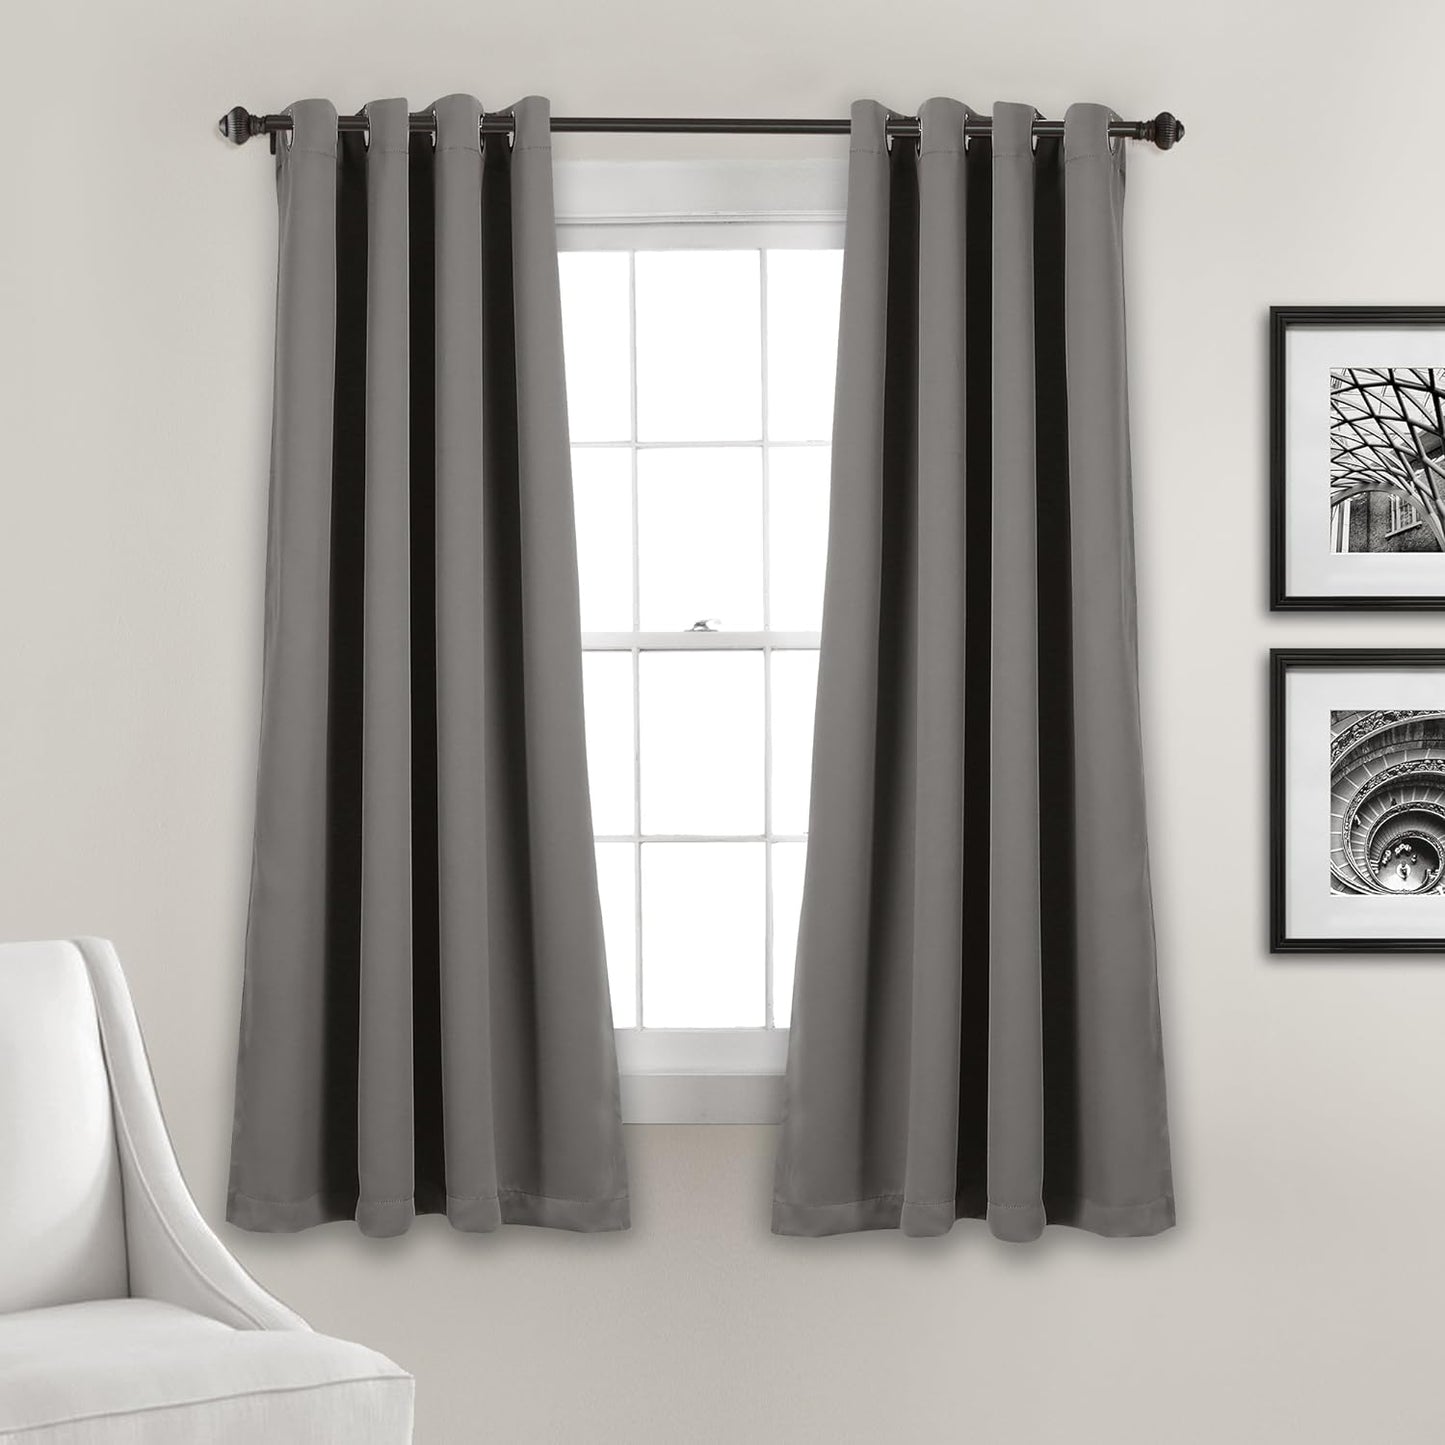 Lush Decor Insulated Grommet Blackout Window Curtain Panels, Pair, 52" W X 120" L, Wheat - Classic Modern Design - 120 Inch Curtains - Extra Long Curtains for Living Room, Bedroom, or Dining Room  Triangle Home Fashions Dark Gray 52"W X 45"L 